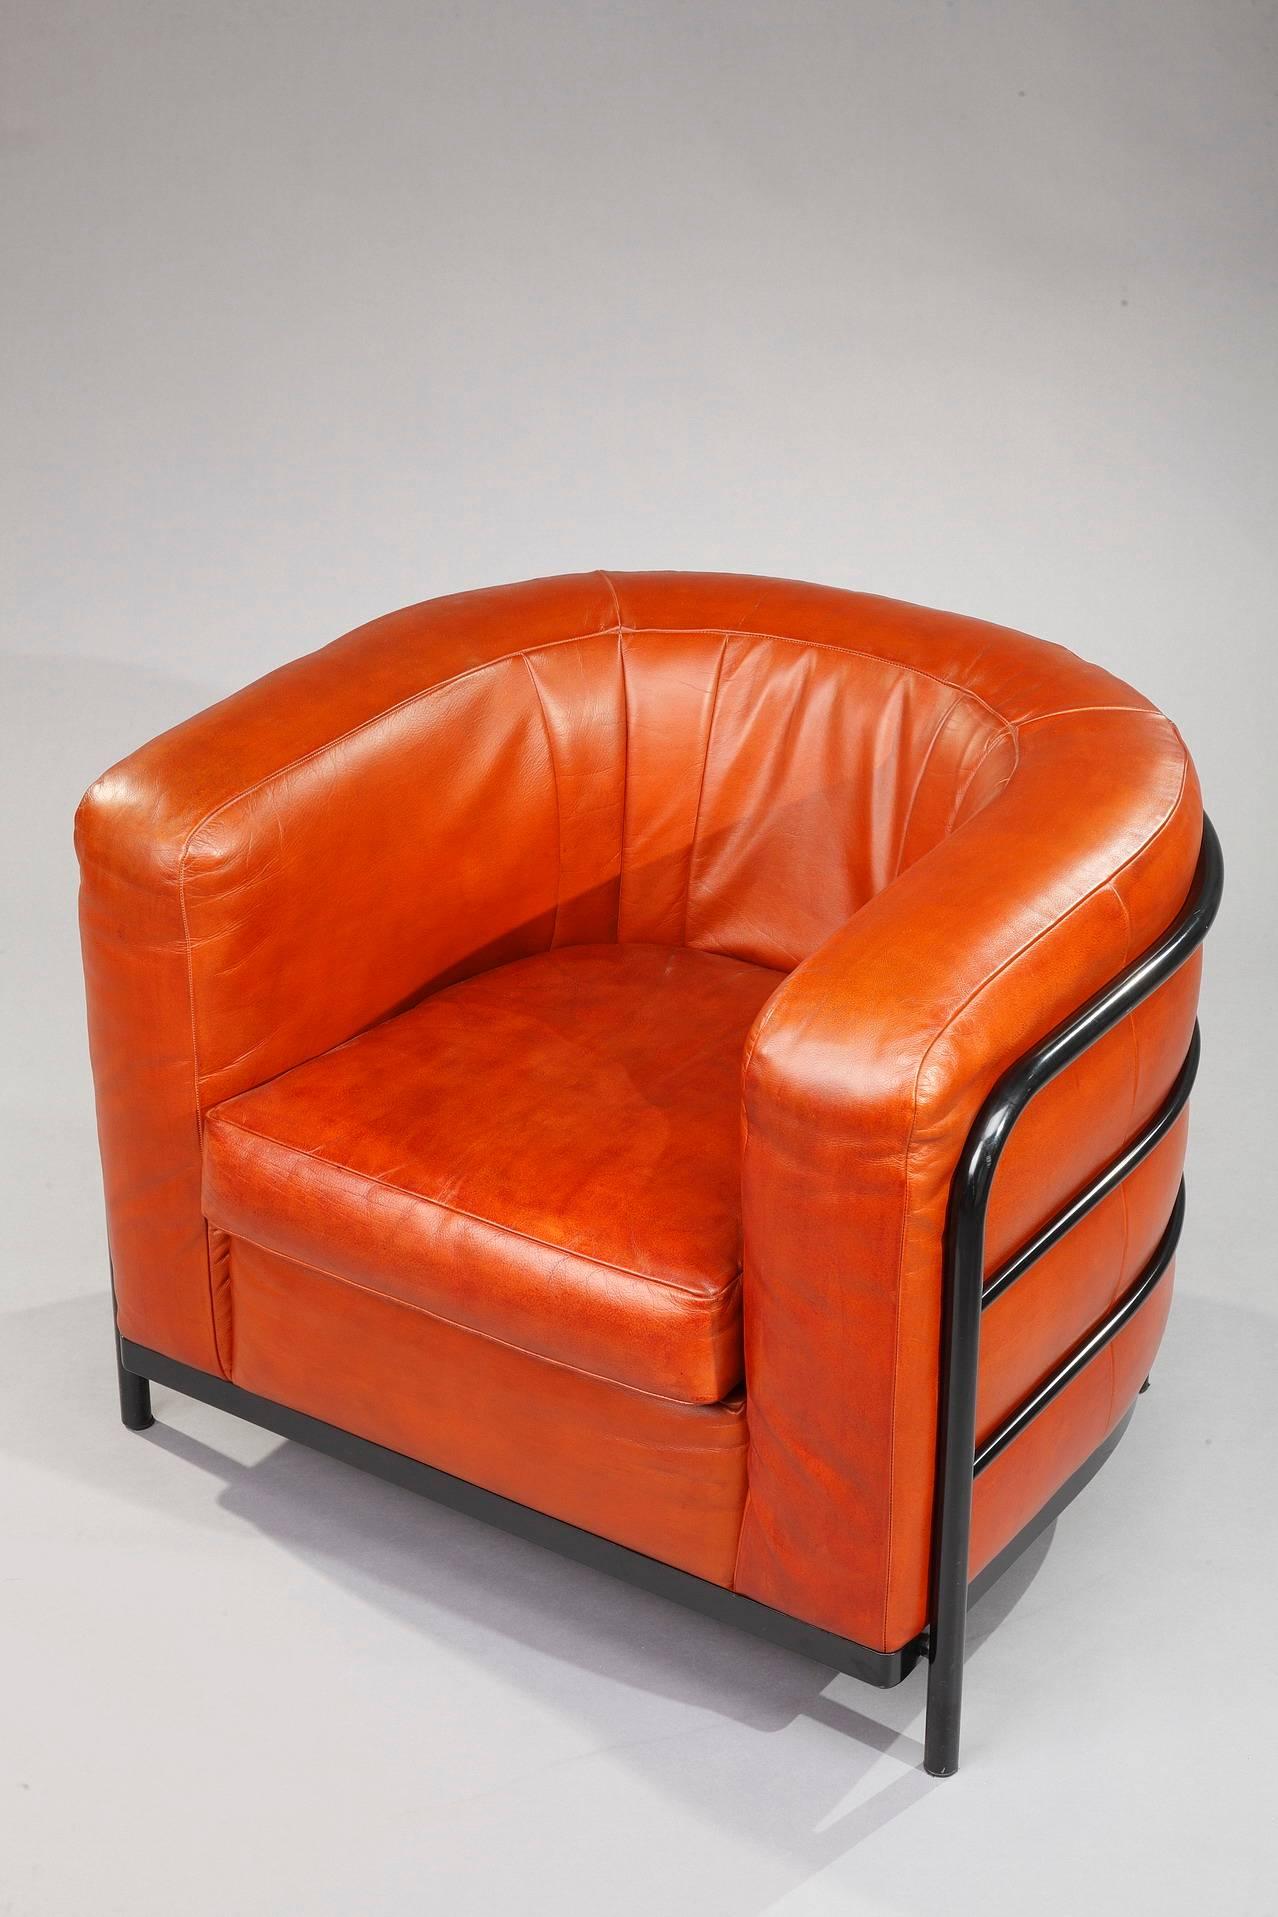 Onda armchair in orange leather designed by Jonathan de Pas, Donato D’Urbino and Paolo Lomazzi in 1985 for the Italian manufacturer Zanotta. Black lacquered metal structure and feet. Labelled by Zanotta Italy and numbered. Five chairs